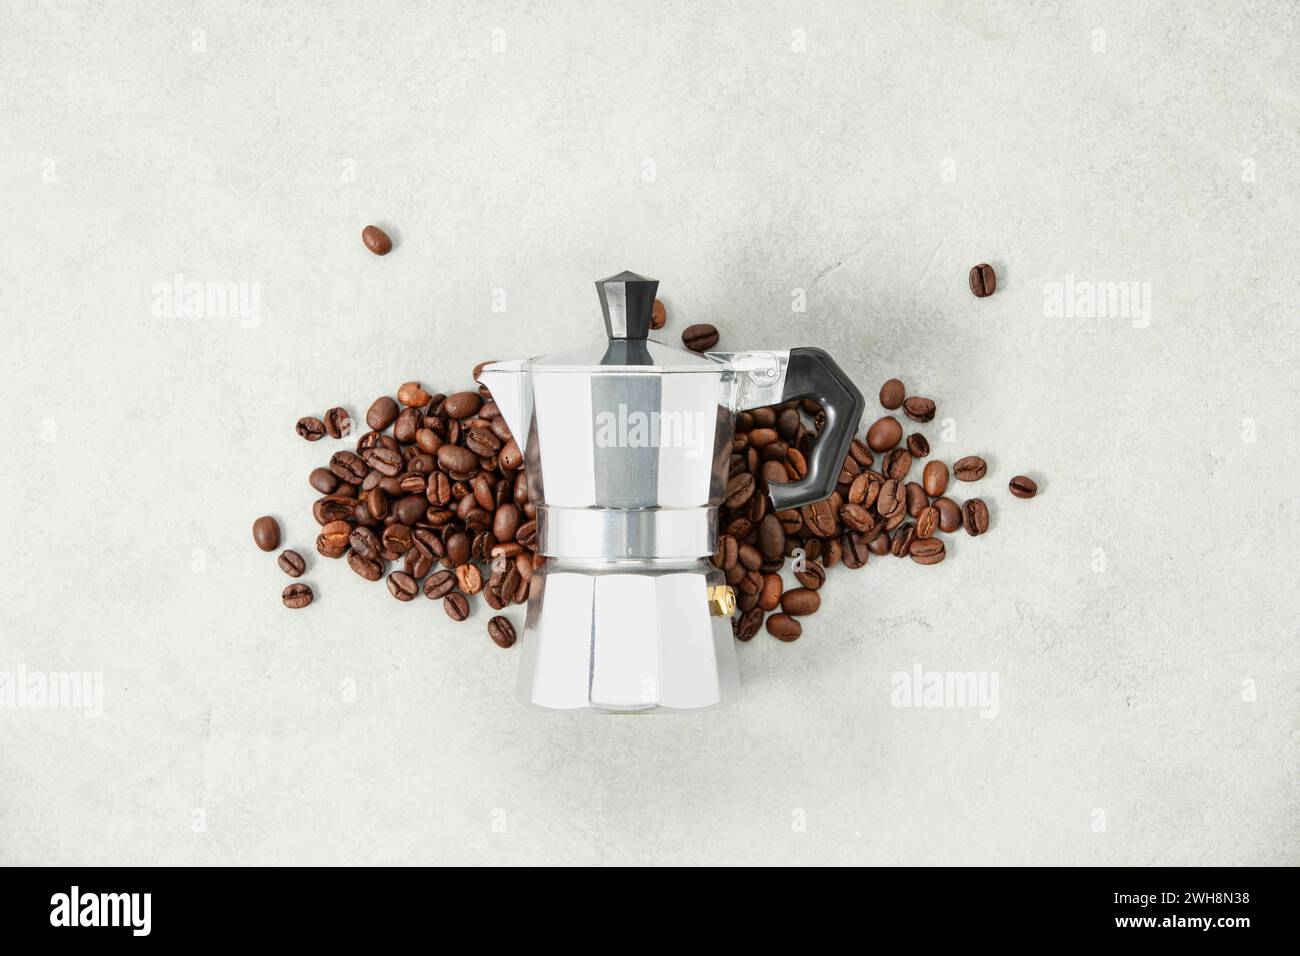 Flat lay of moka pot coffee maker and coffee beans on grey stone background Stock Photo